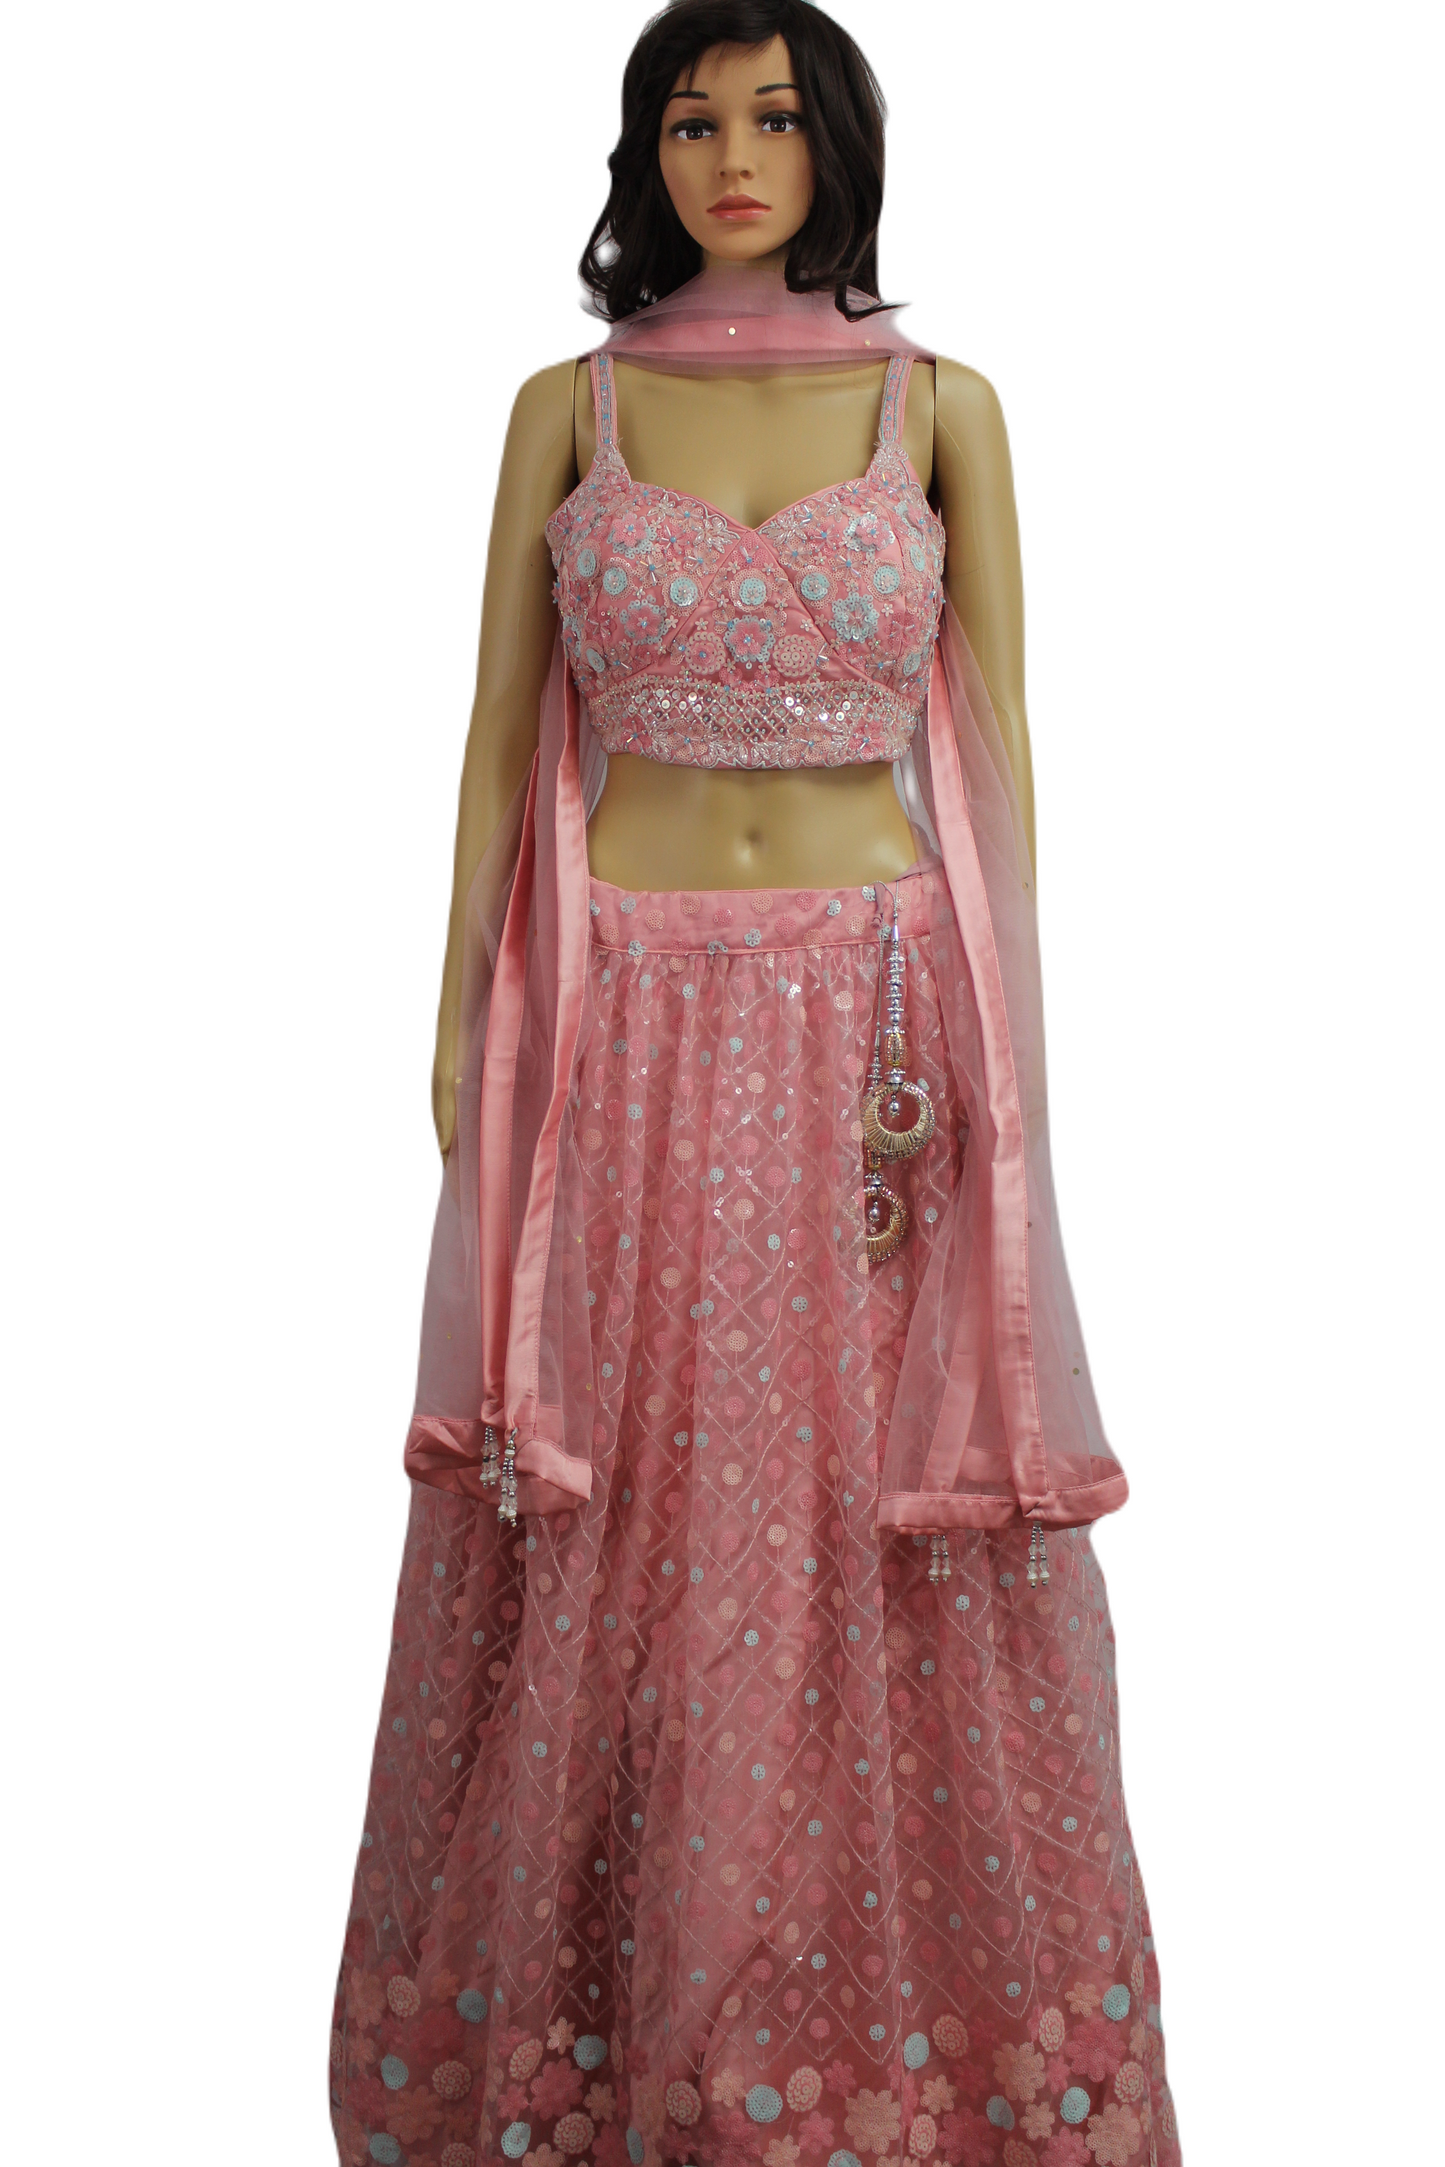 Pink Handworked Fusion Crop Top with Exquisite Soft Net Skirt